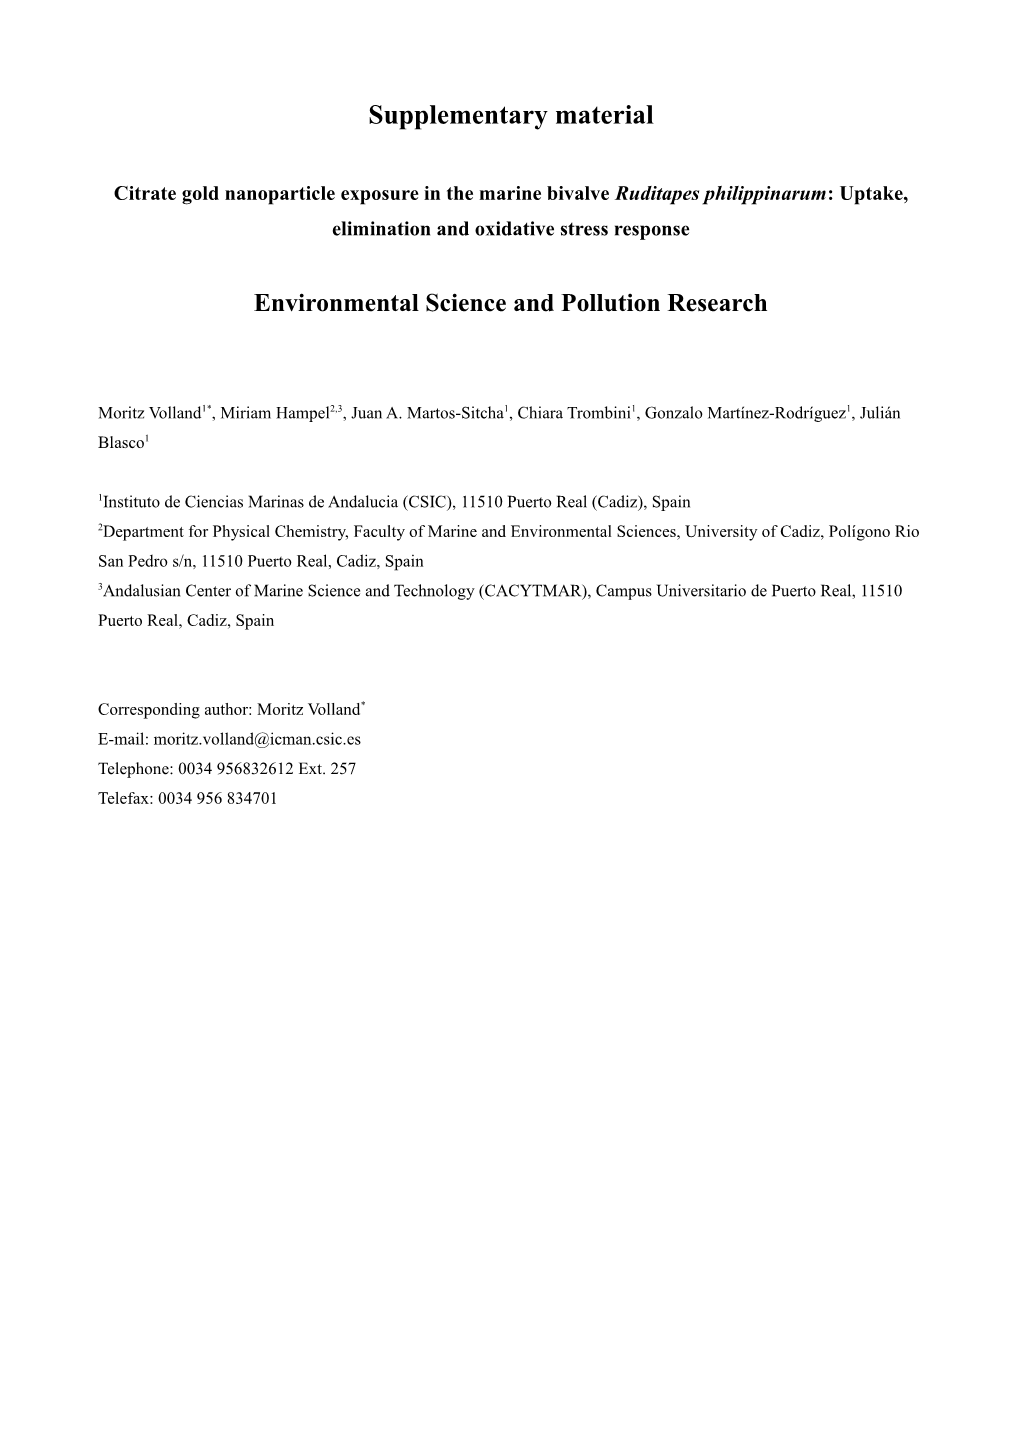 Environmental Science and Pollution Research s2